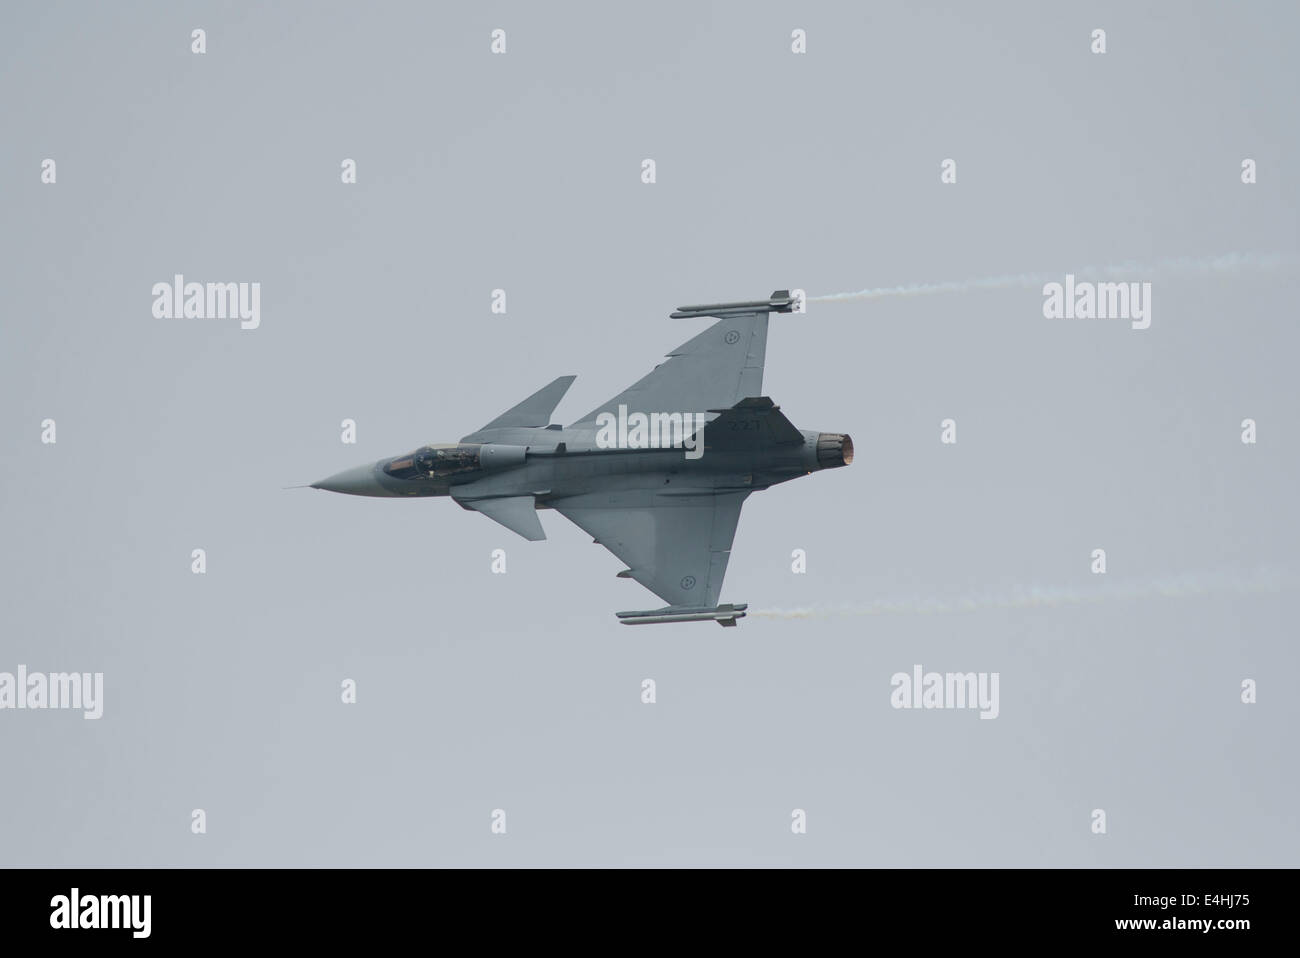 RAF Fairford, Gloucestershire UK. 11th July 2014. Fast jets on display at the first day of RIAT. Swedish Air Force Saab JAS 39C Gripen makes a high speed fly-past. Credit:  Malcolm Park editorial/Alamy Live News Stock Photo